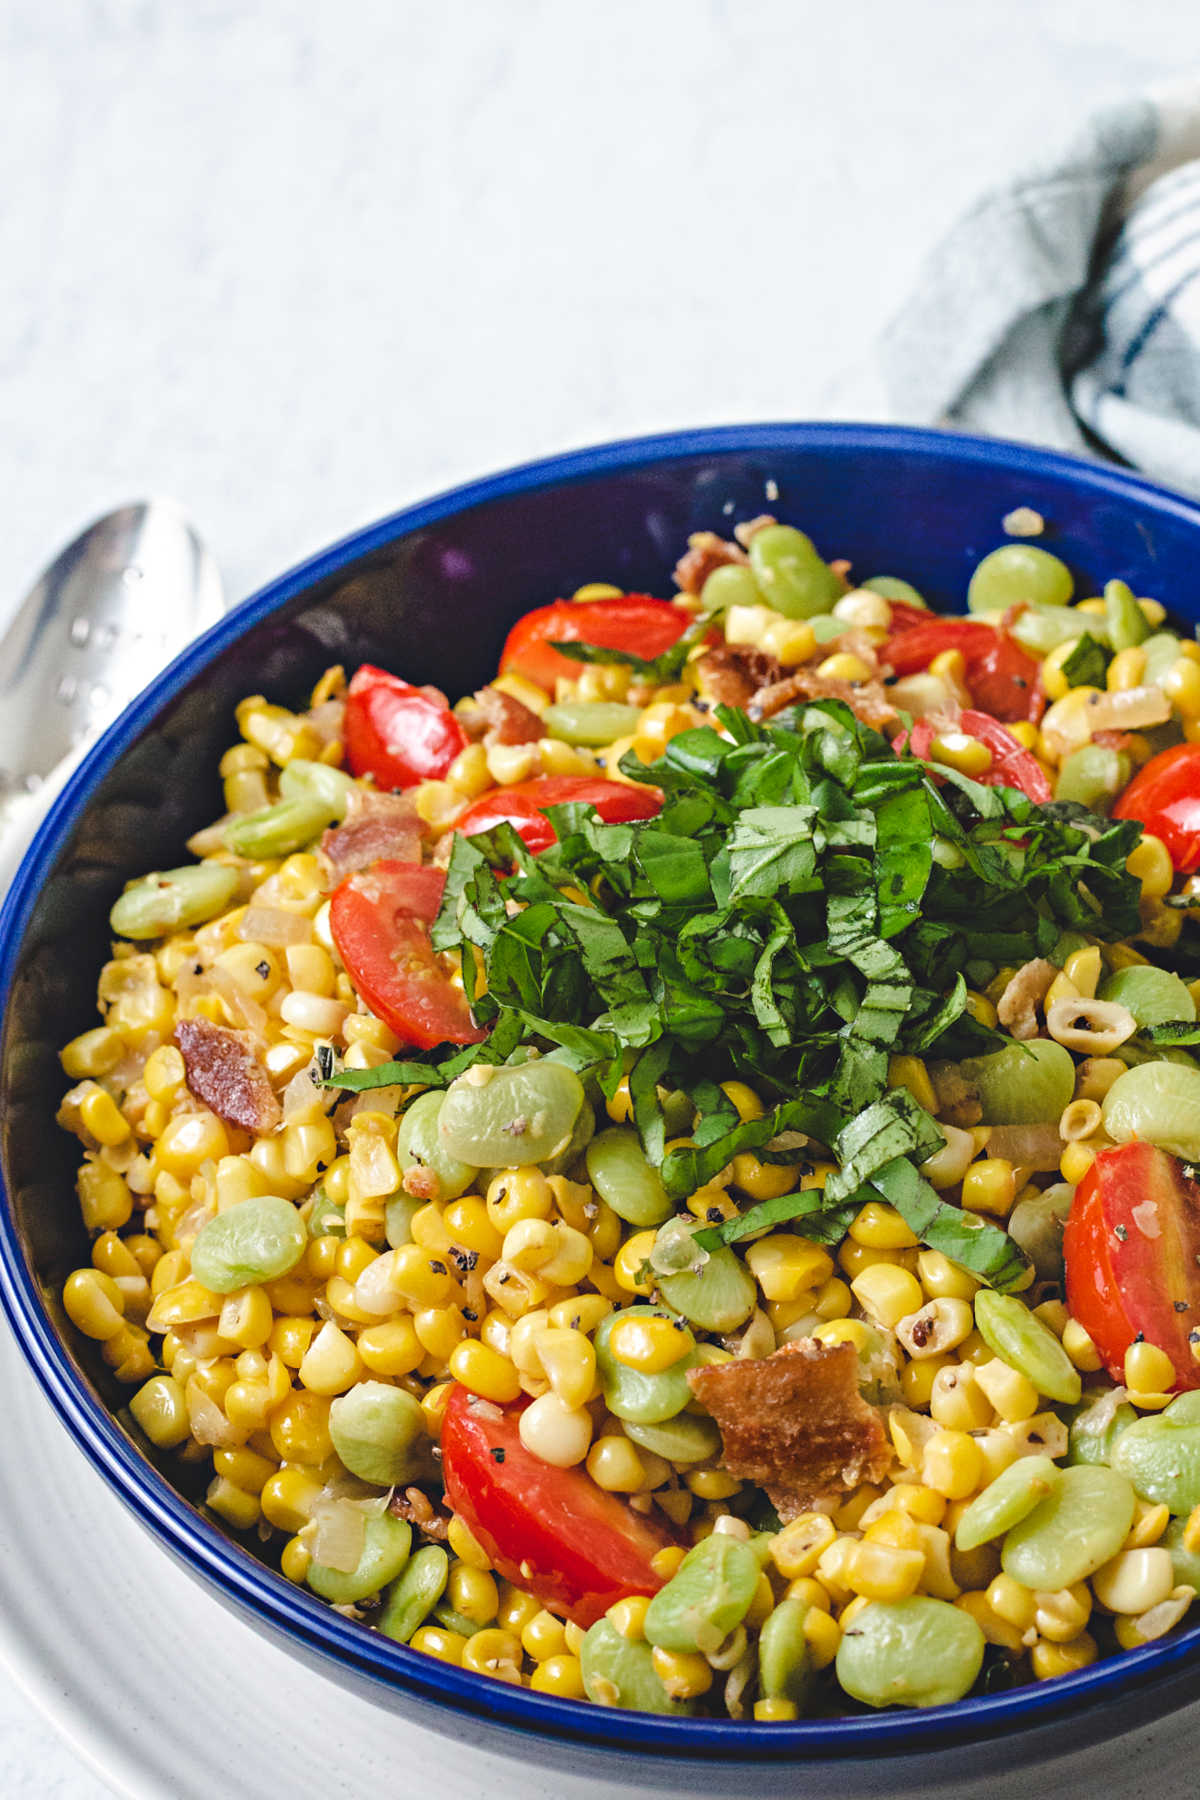 corn succotash garnished with a mound of basil chiffonade in a blue bowl on top of a white plate.